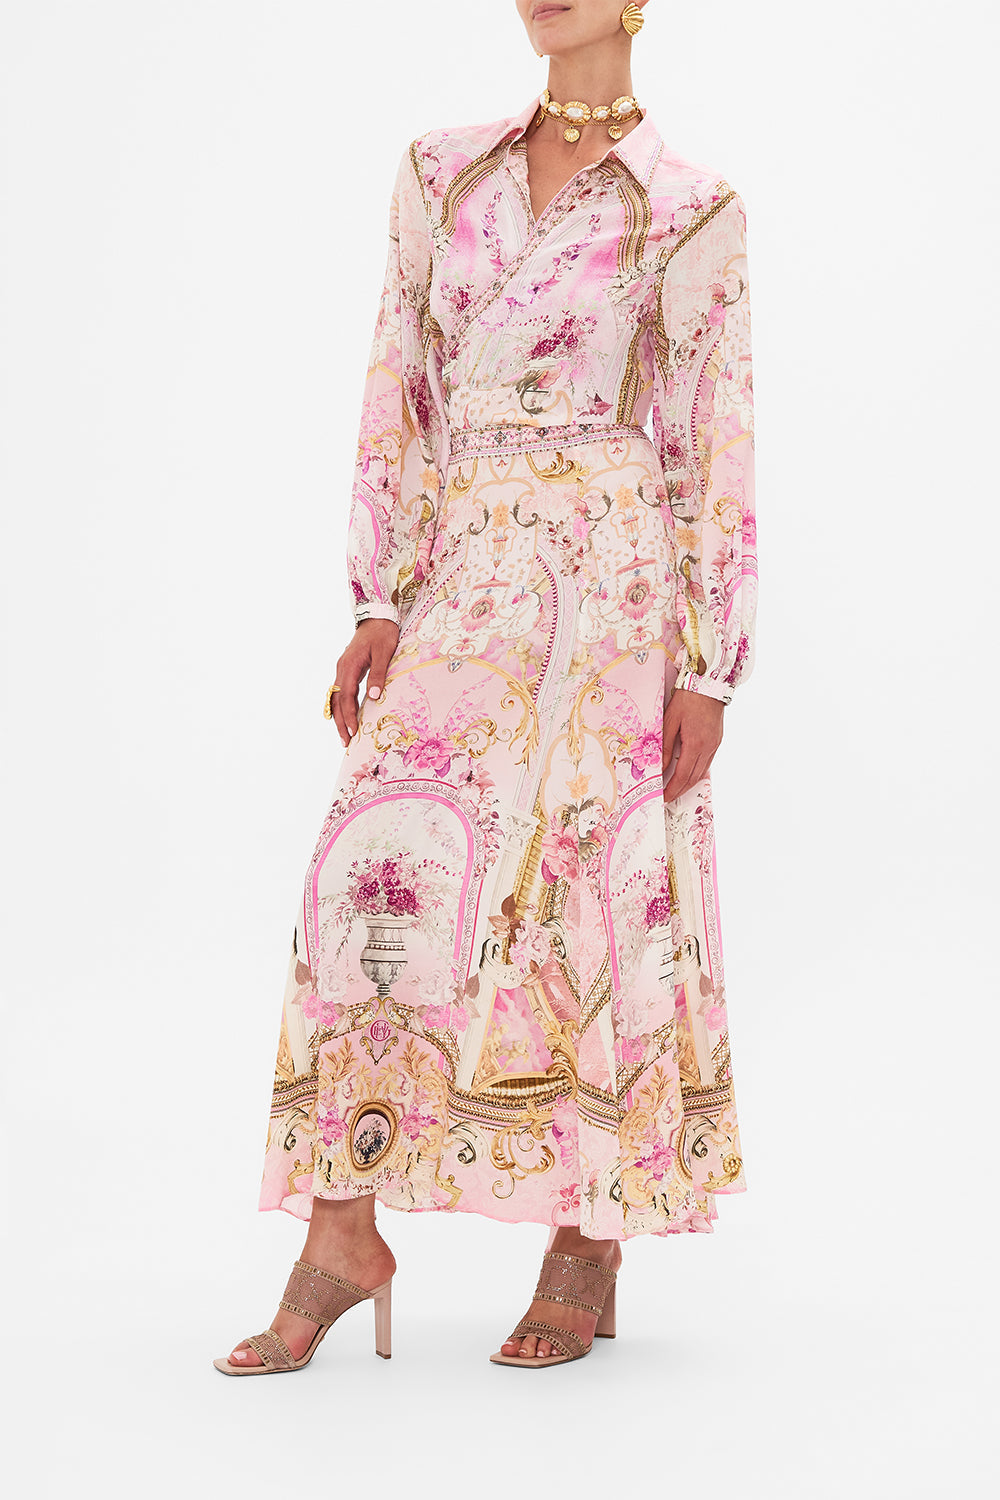 Side view of model wearing CAMILLA pink maxi skirt in Fresco Fairytale print